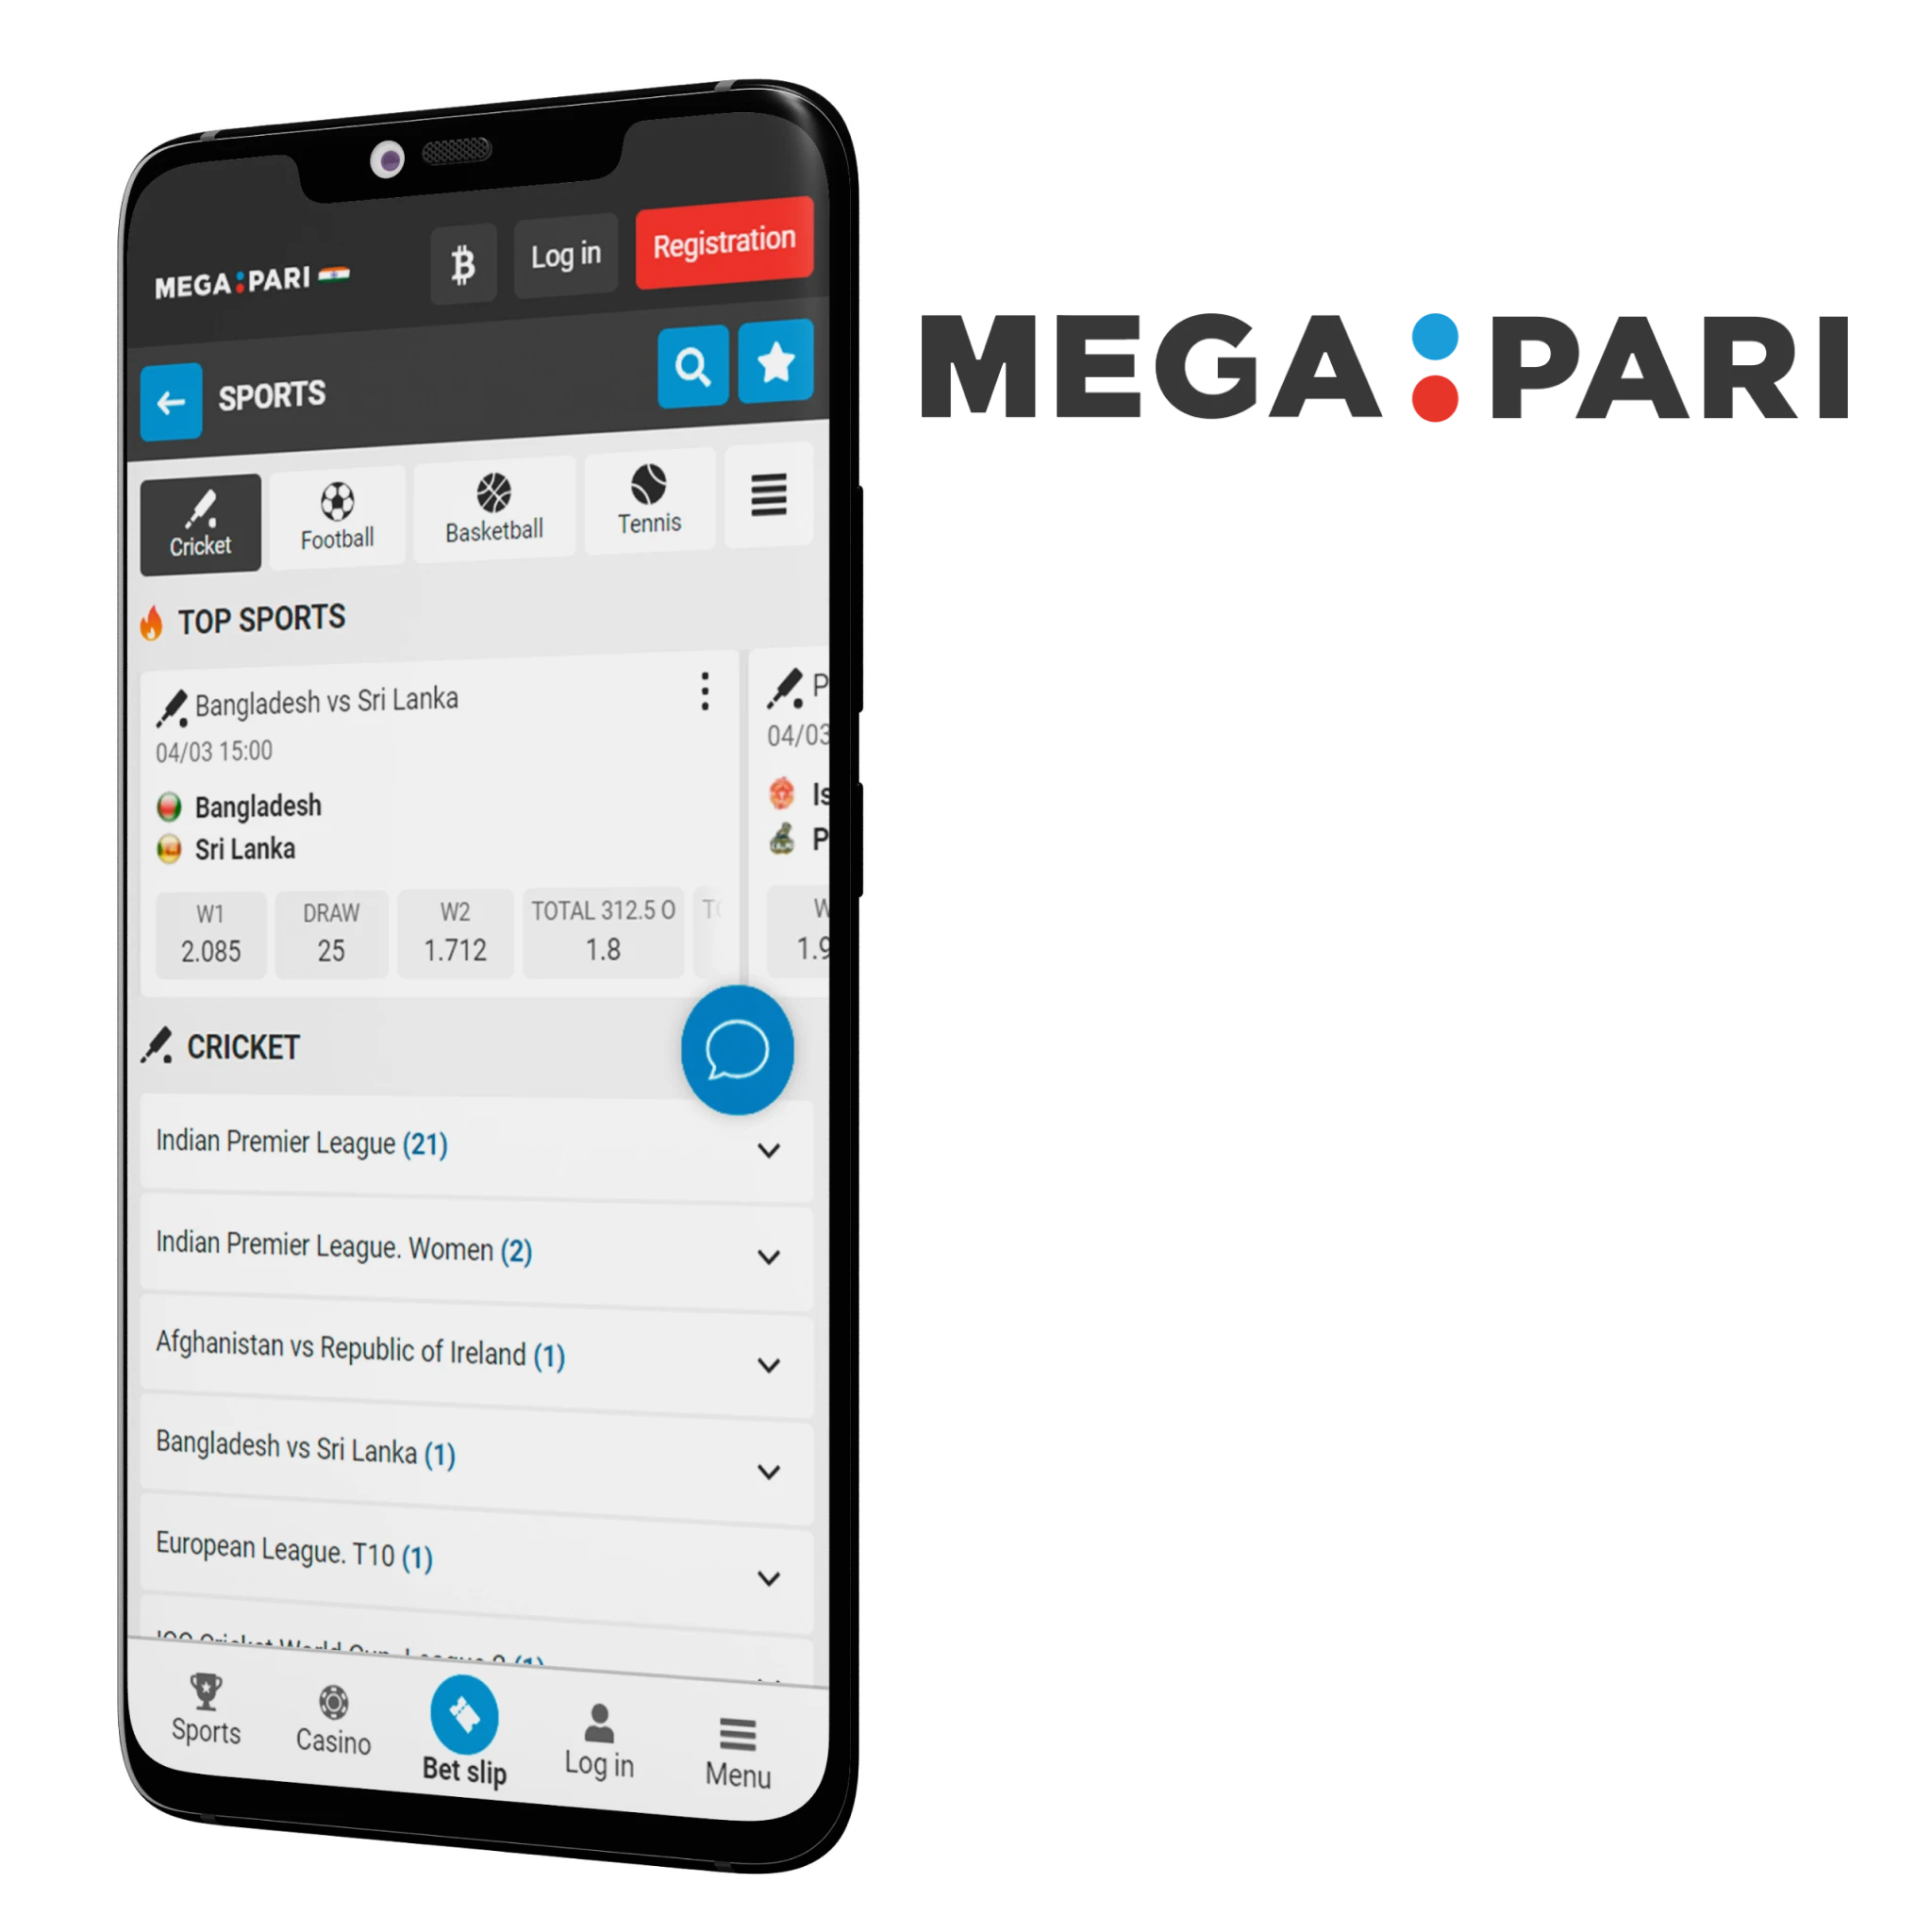 MegaPari app offers welcome bonuses to cricket betting enthusiasts and gamblers.